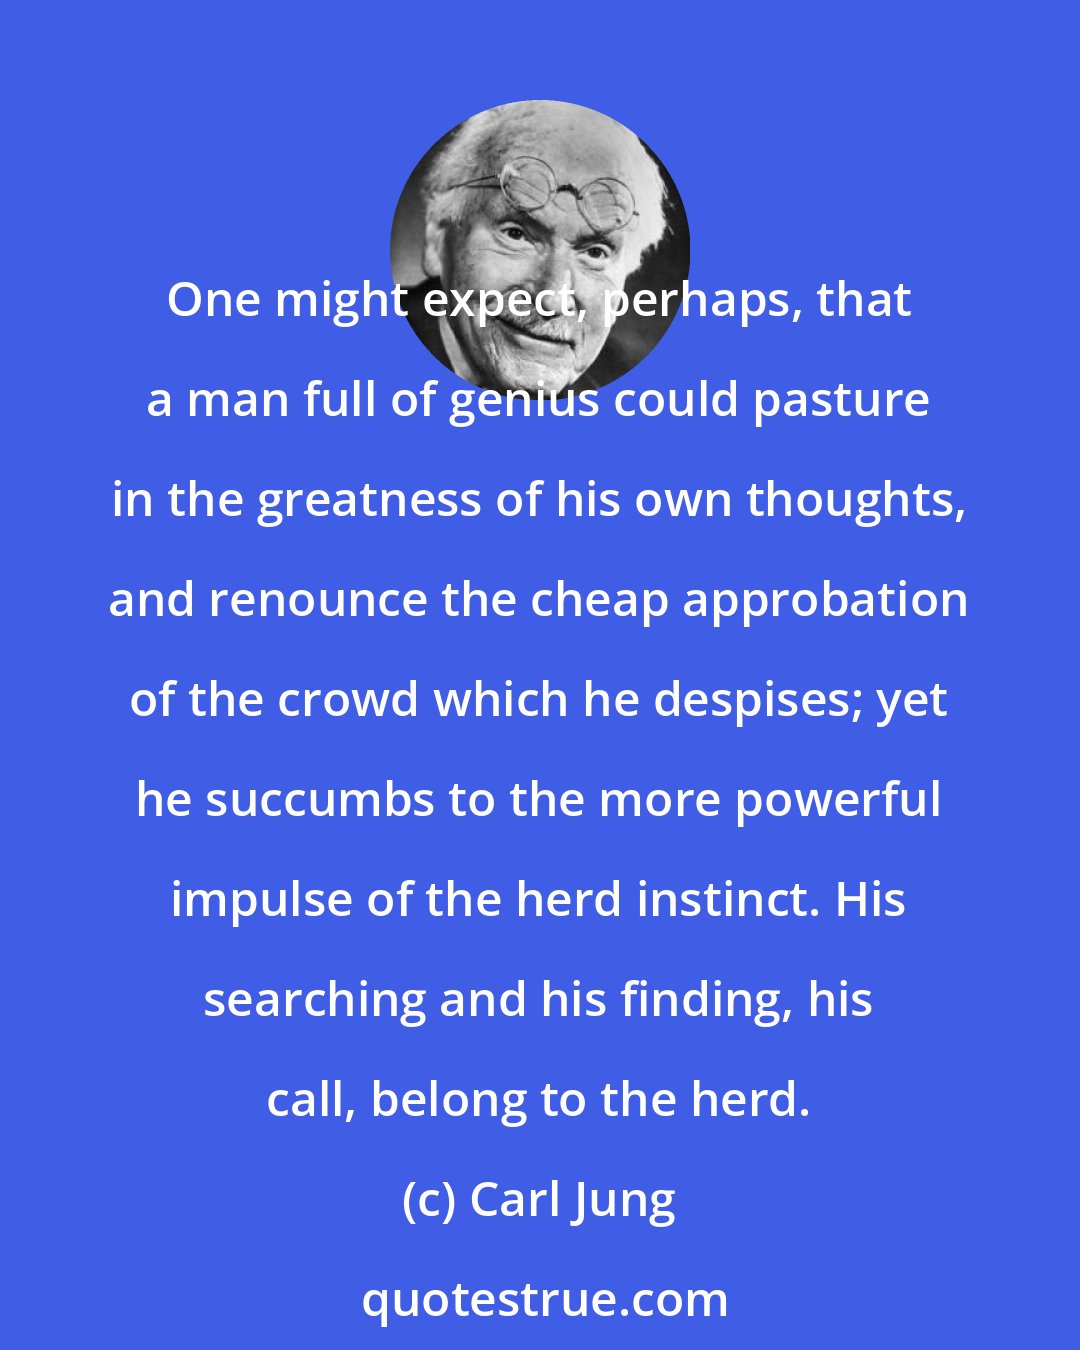 Carl Jung: One might expect, perhaps, that a man full of genius could pasture in the greatness of his own thoughts, and renounce the cheap approbation of the crowd which he despises; yet he succumbs to the more powerful impulse of the herd instinct. His searching and his finding, his call, belong to the herd.